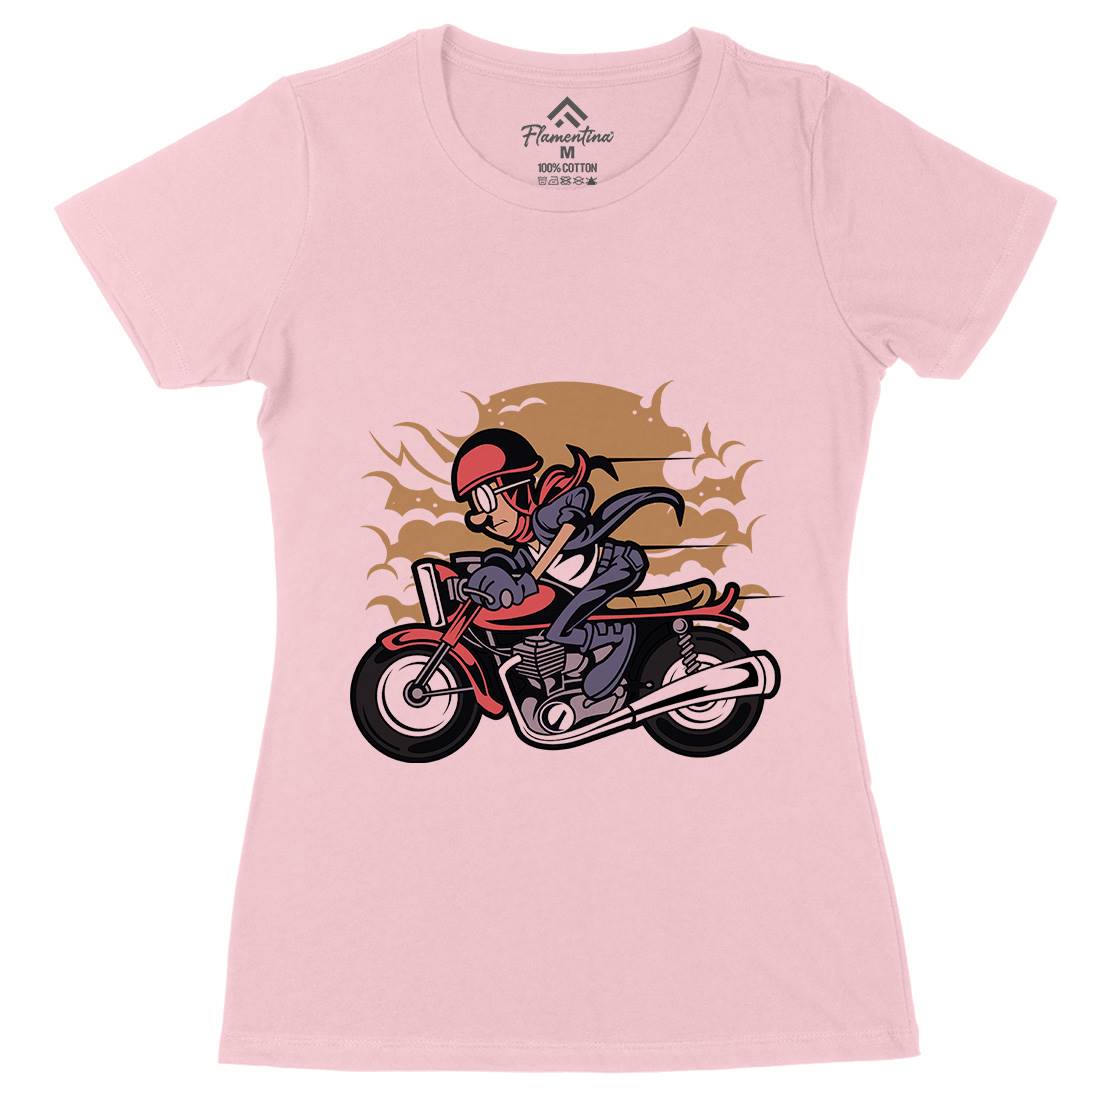 Caferacer Womens Organic Crew Neck T-Shirt Motorcycles C325